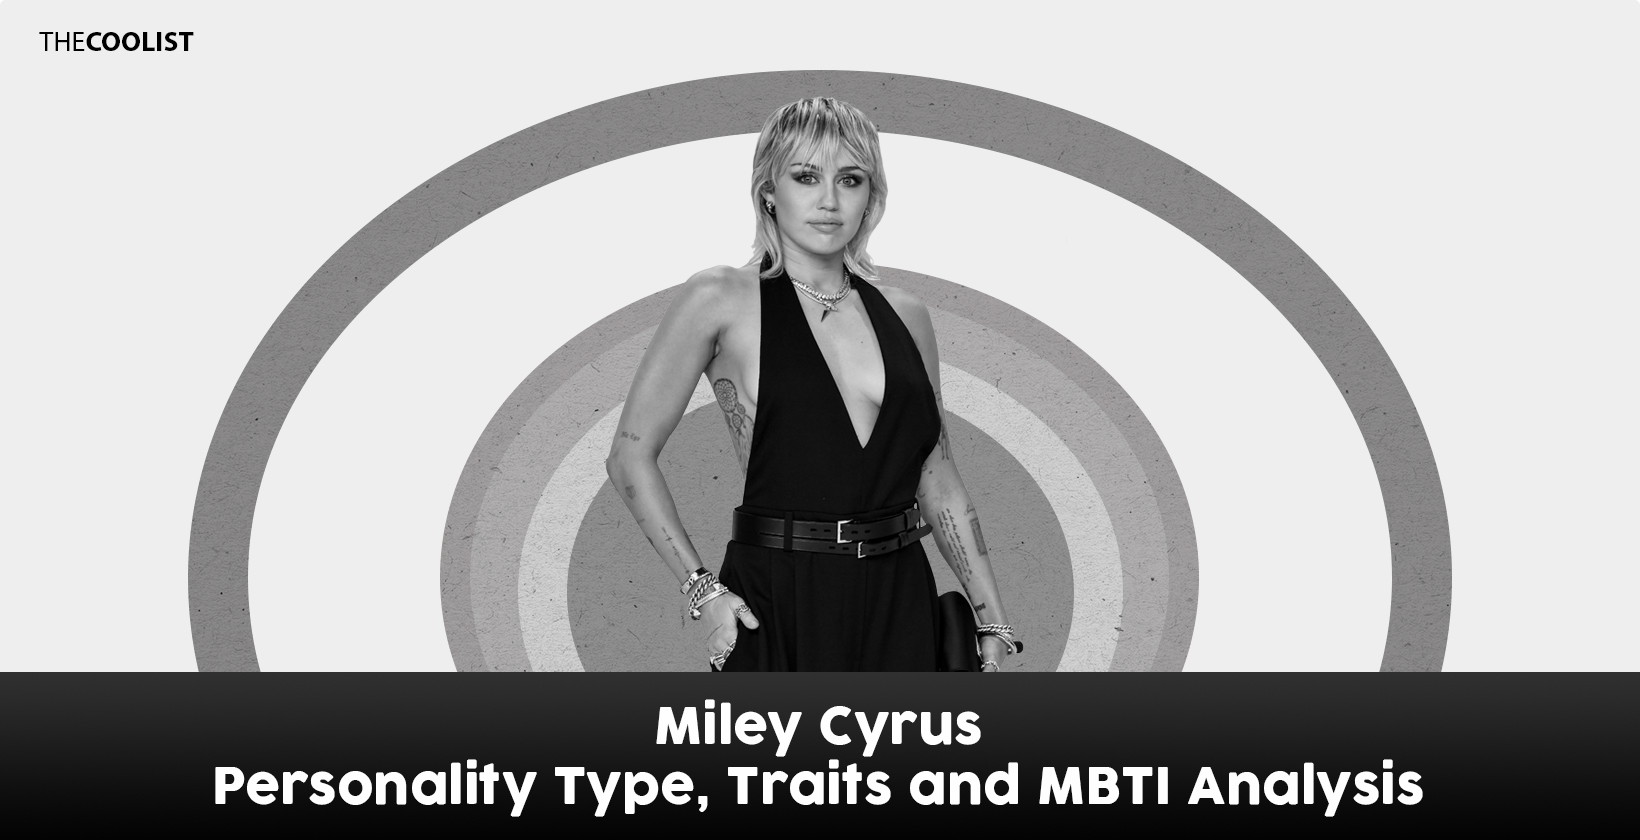 Miley Cyrus Personality Type, Traits, and MBTI Analysis